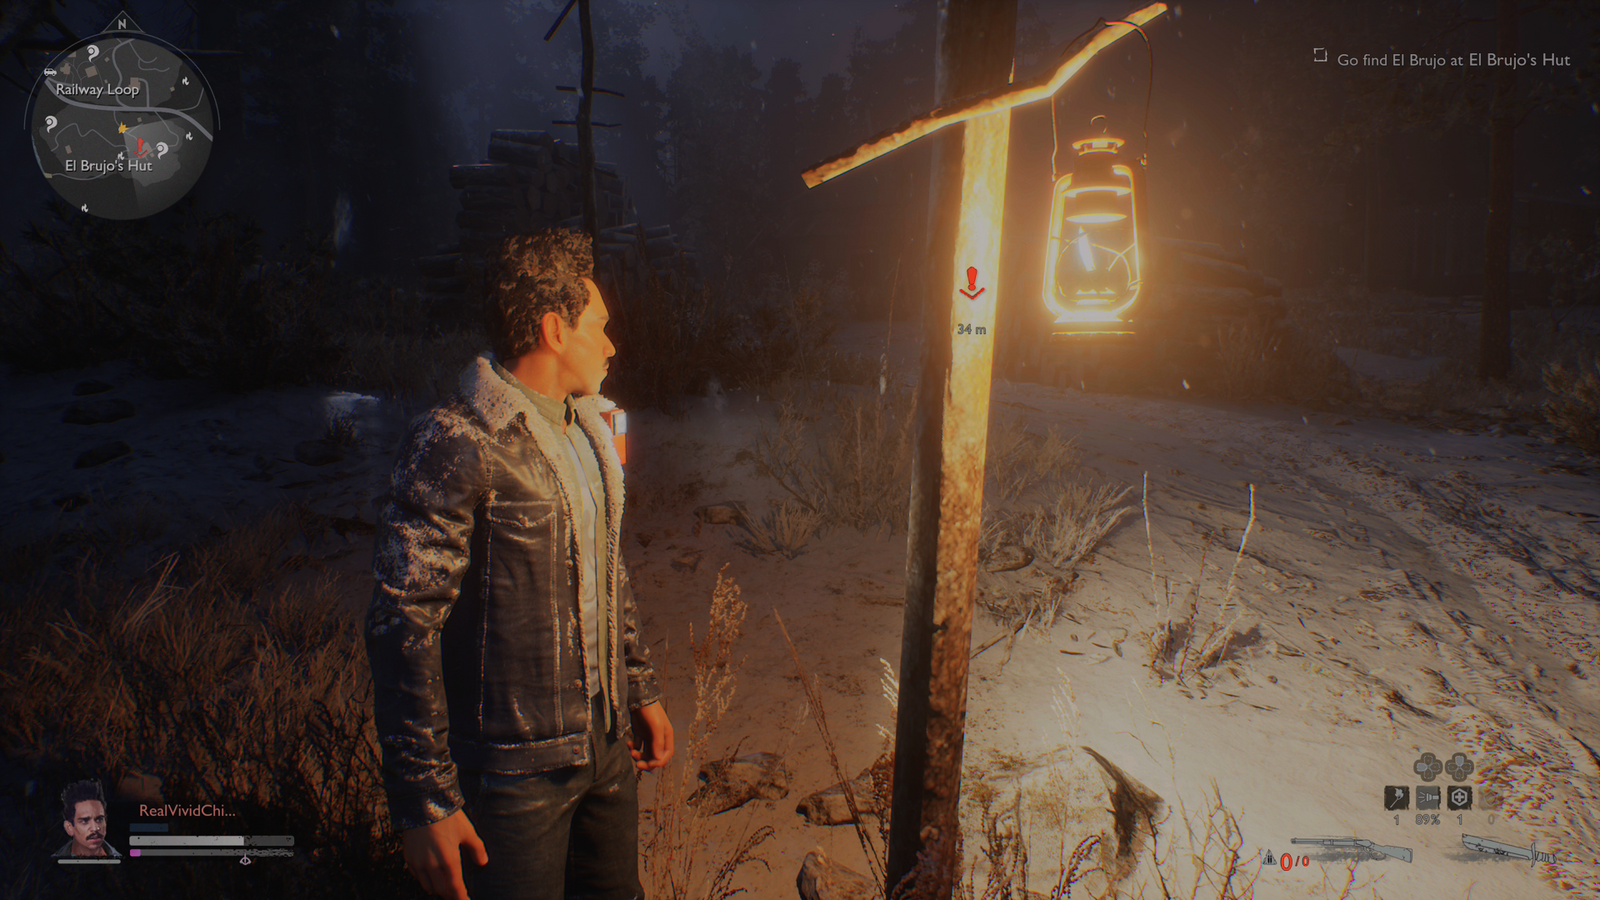 Pablo from Ash vs Evil Dead Standing next to a lantern that he lit with matches to lower his fear.